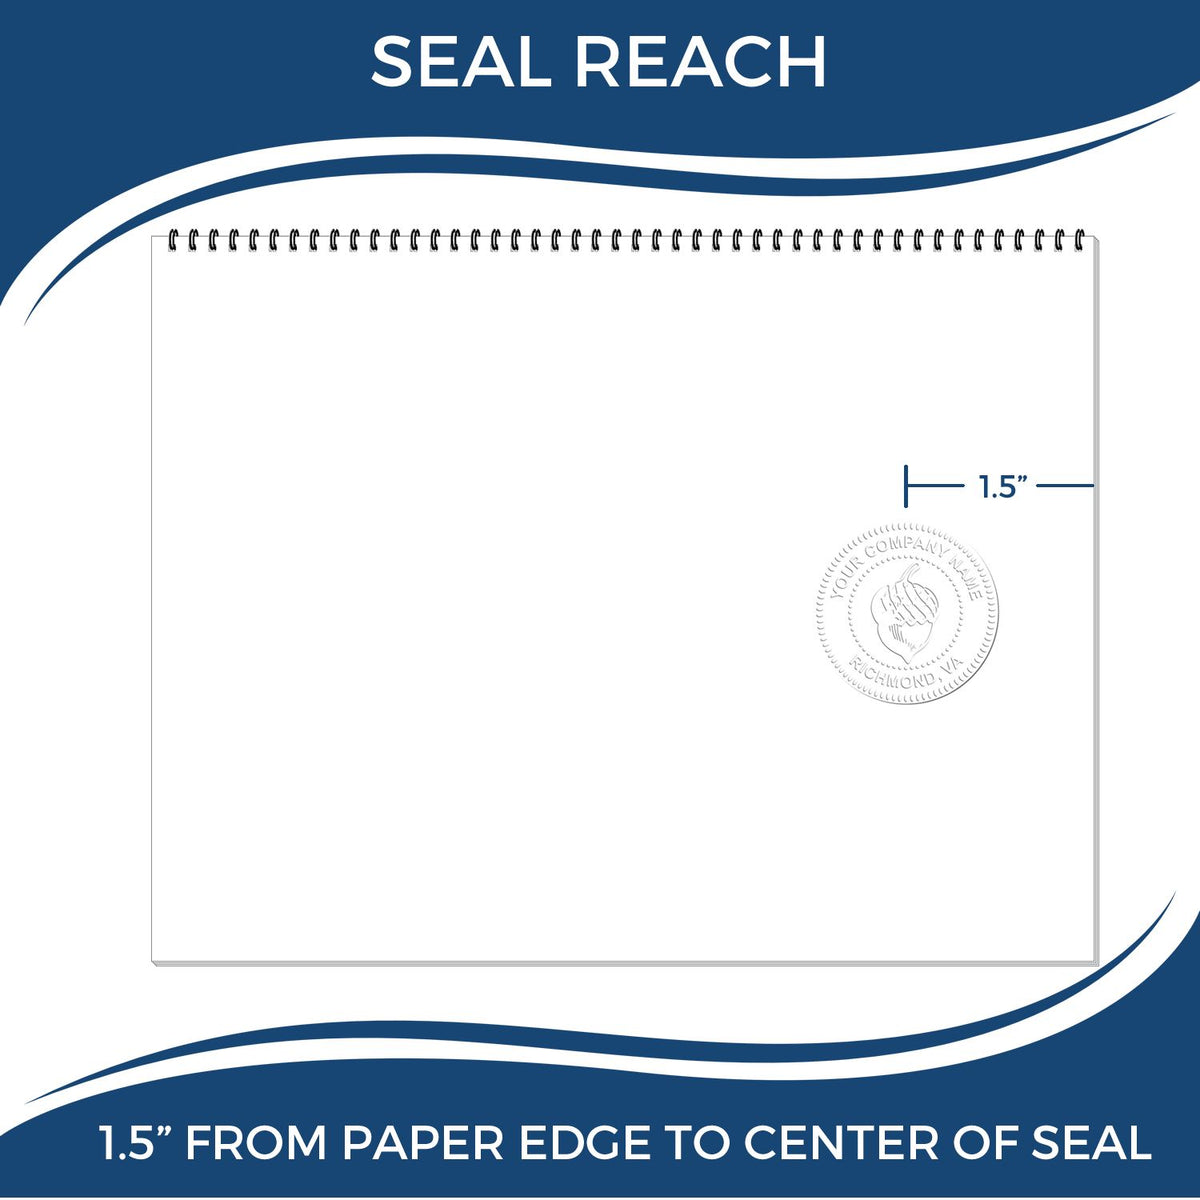 An infographic showing the seal reach which is represented by a ruler and a miniature seal image of the Soft Hawaii Professional Geologist Seal